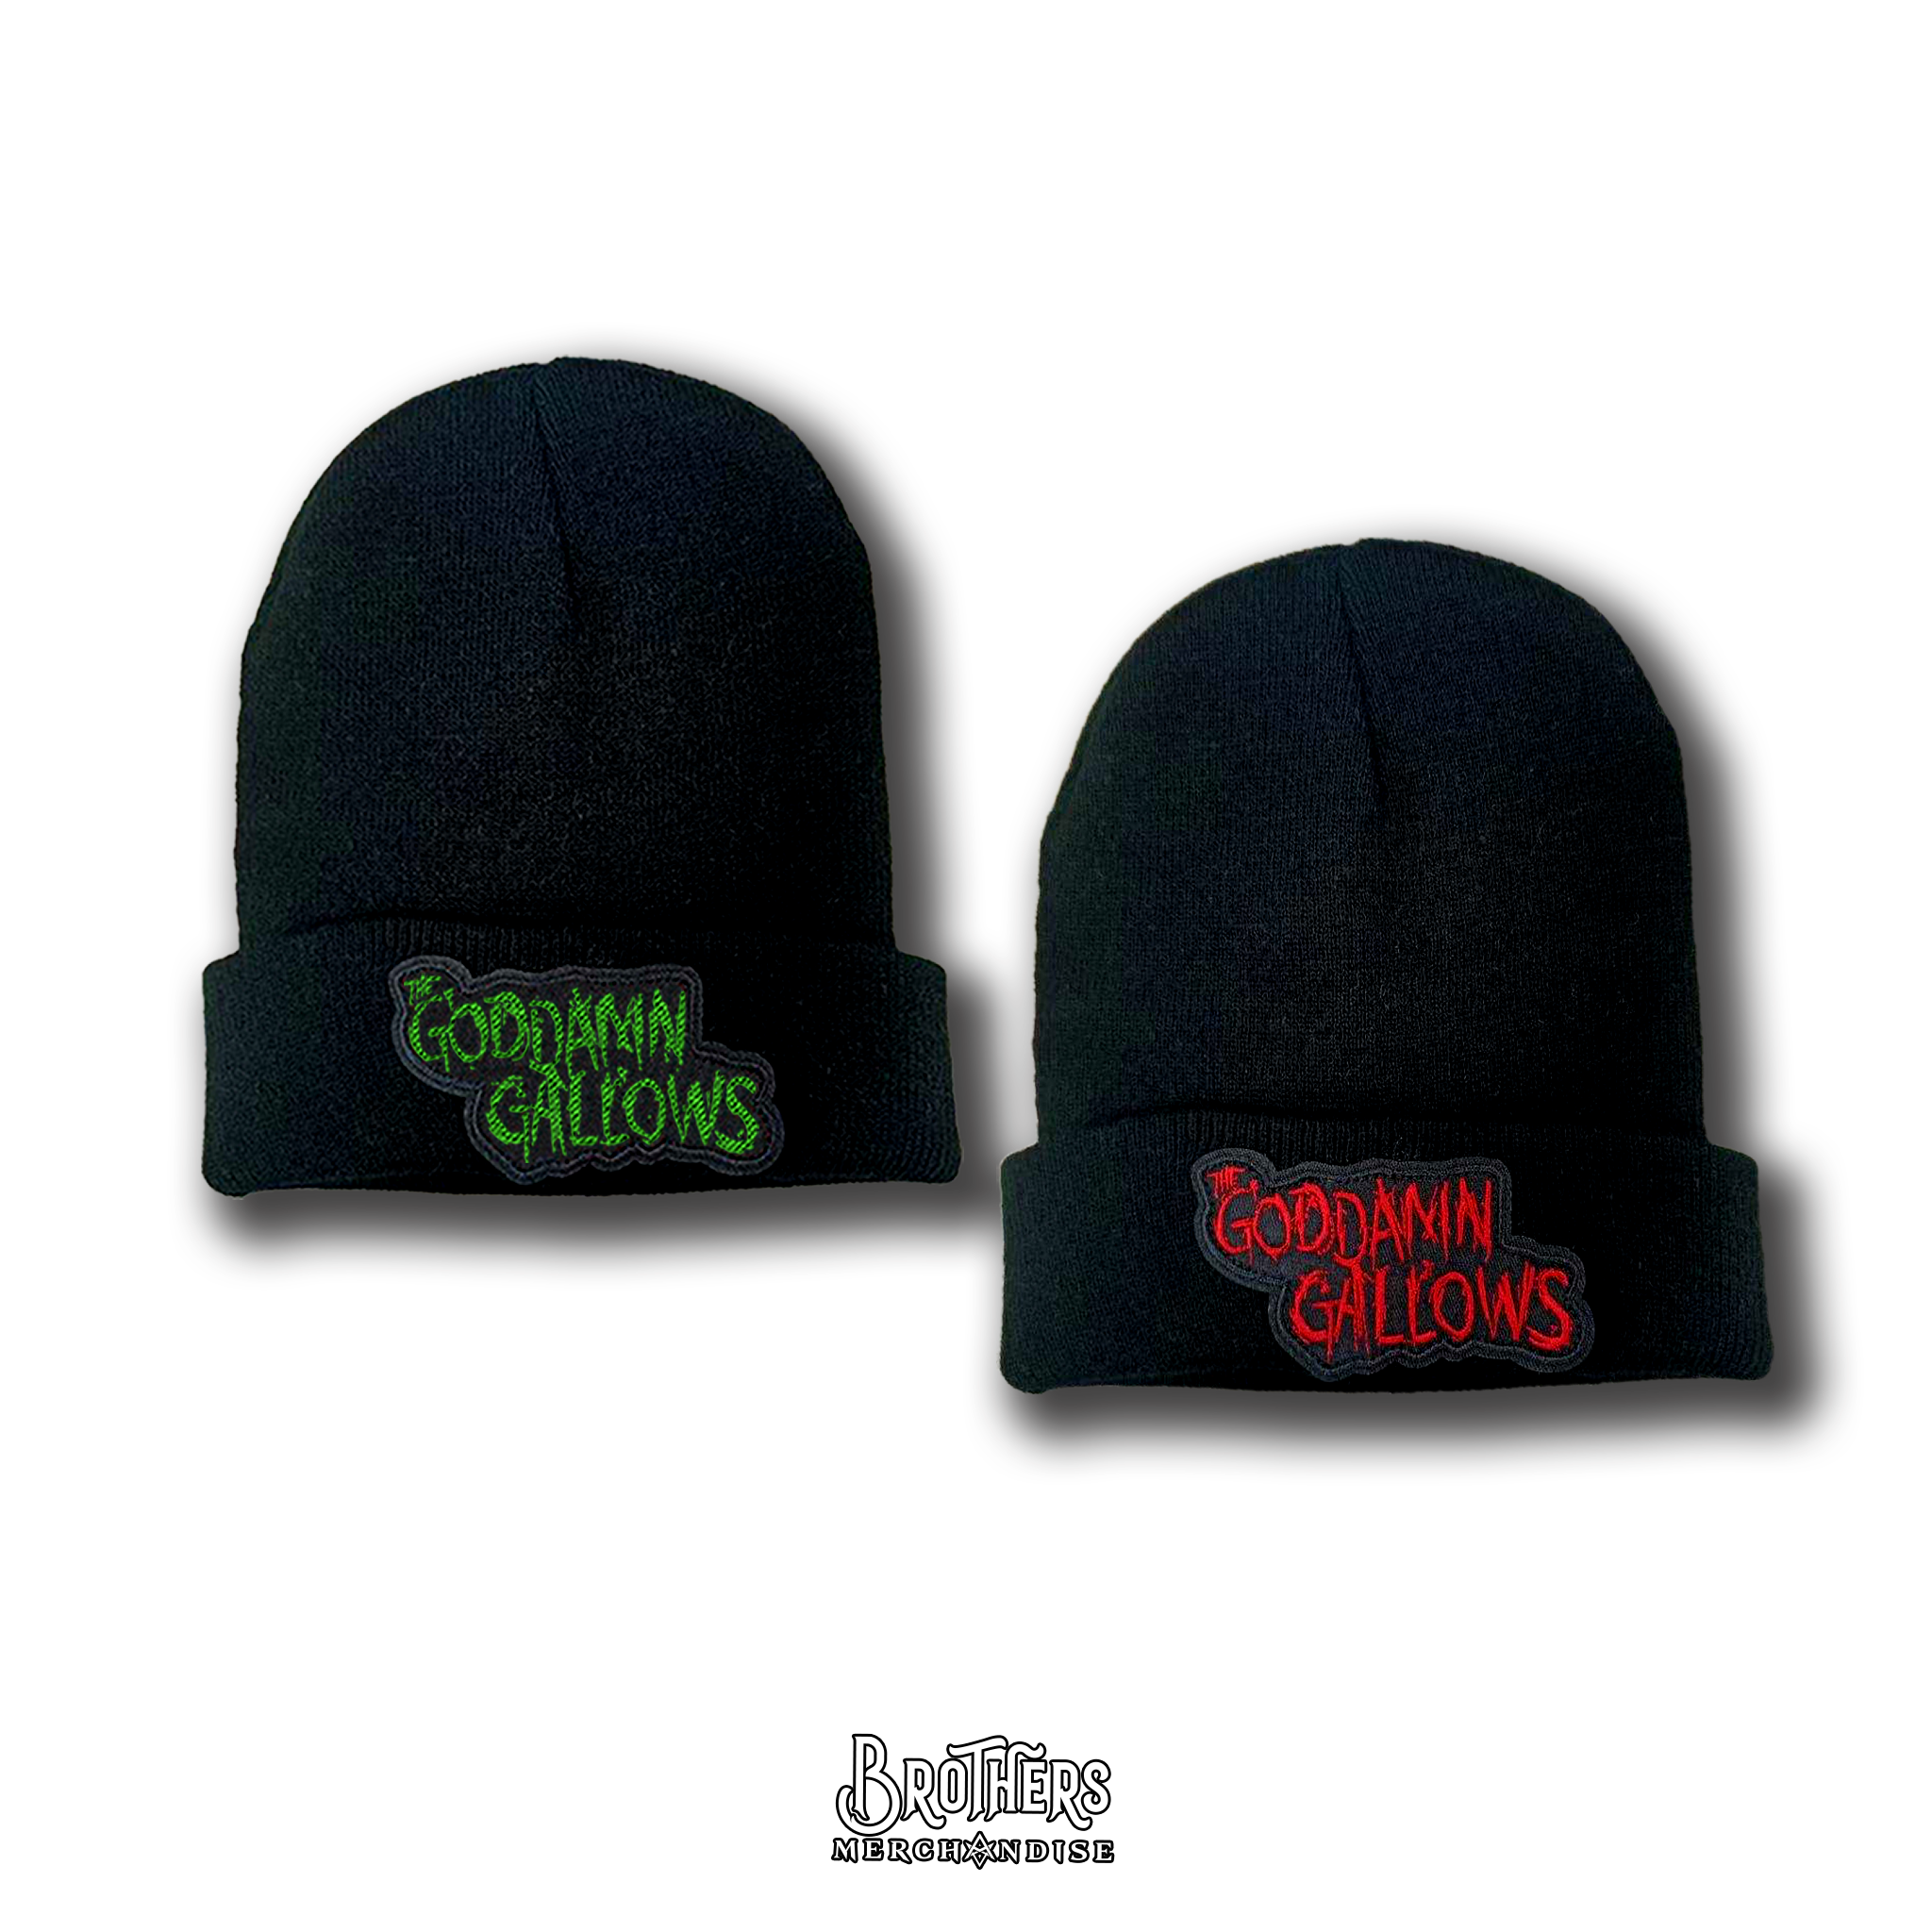 Goddamn Gallows Embroidered Patch Beanies